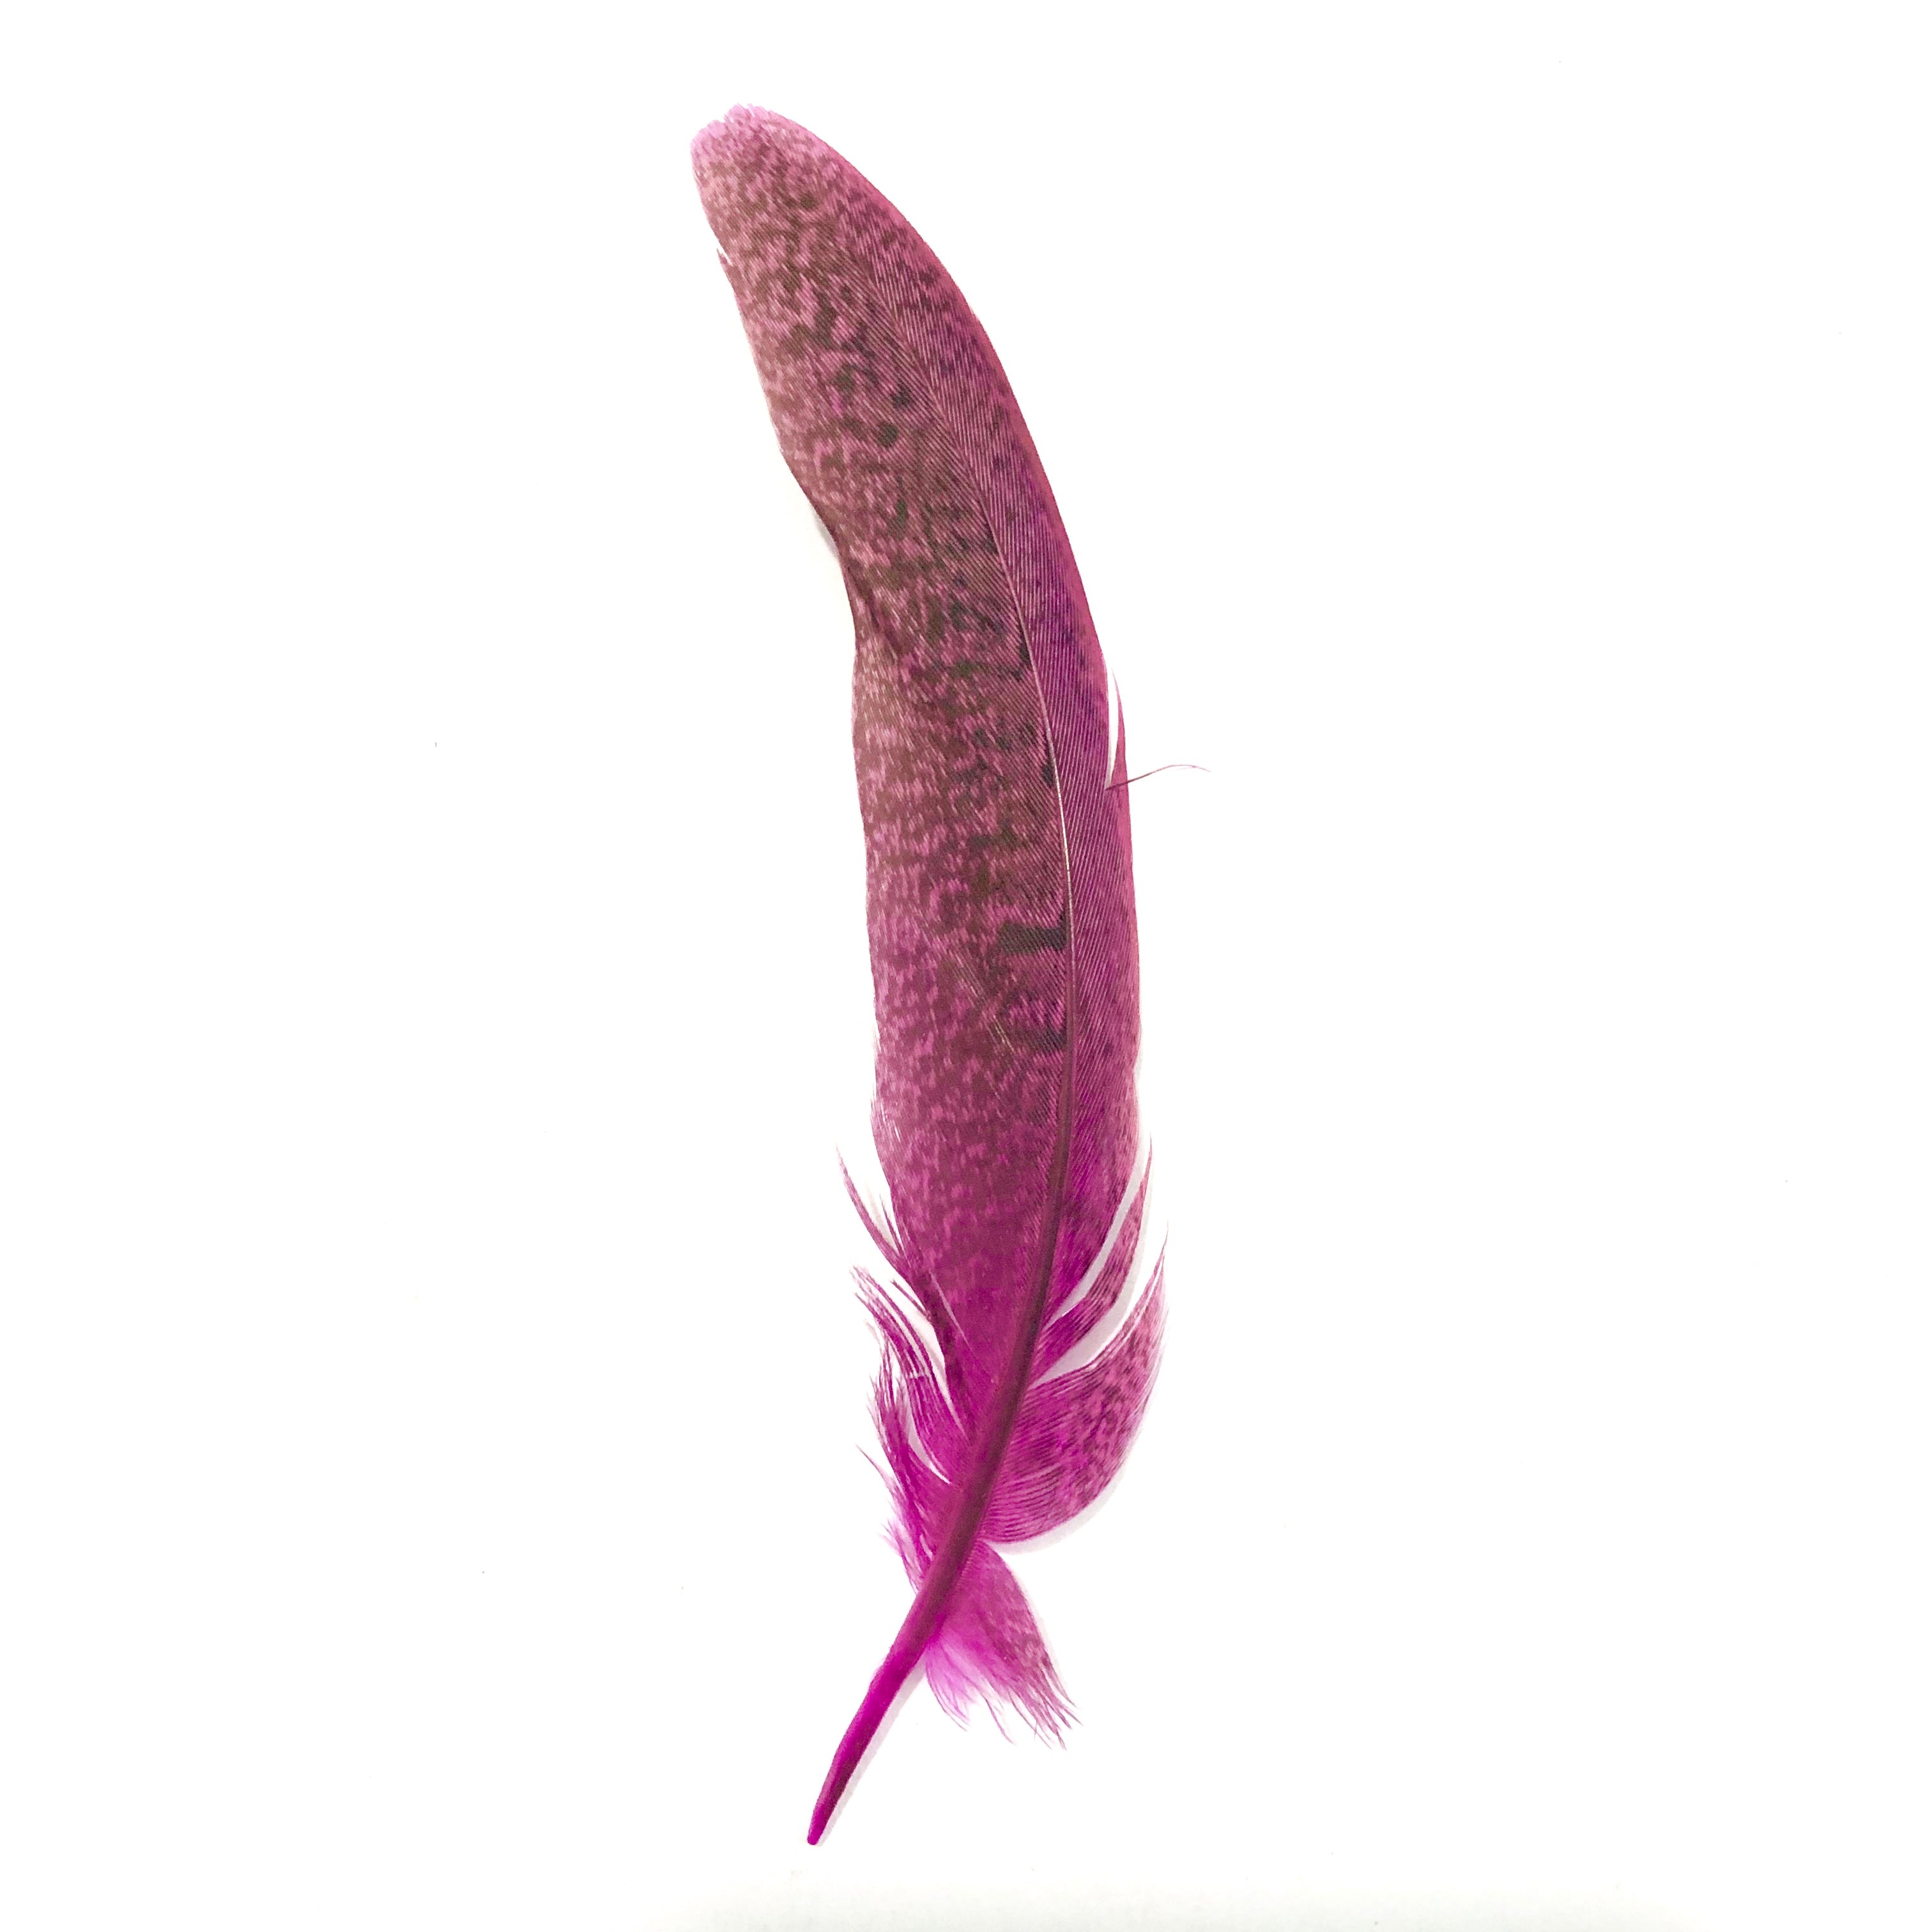 Under 6" Ringneck Pheasant Tail Feather x 10 pcs - Hot Pink